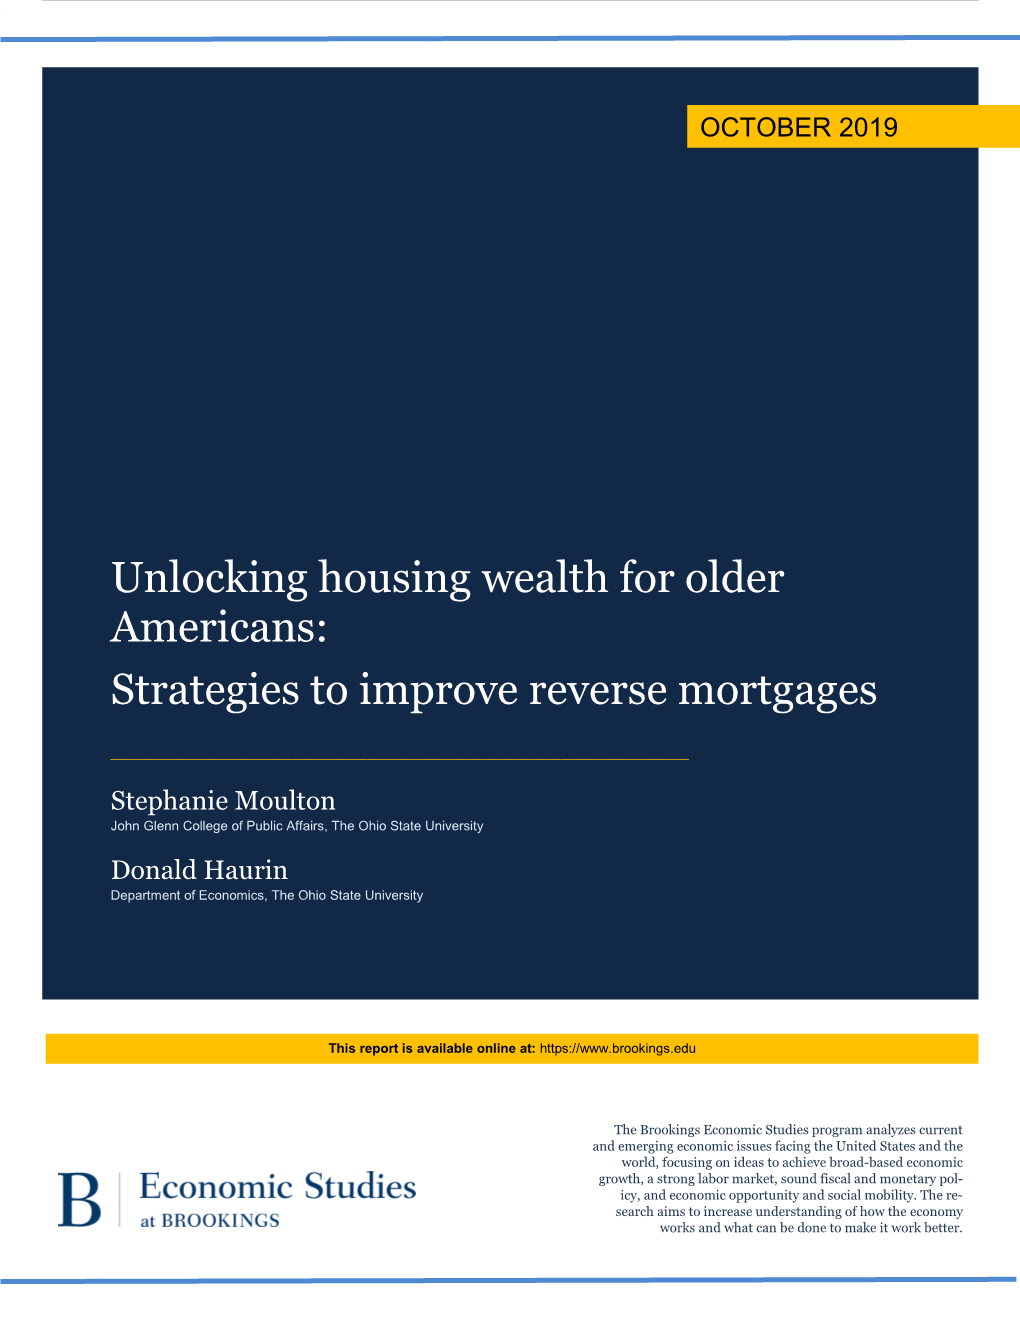 Unlocking Housing Wealth for Older Americans: Strategies to Improve Reverse Mortgages